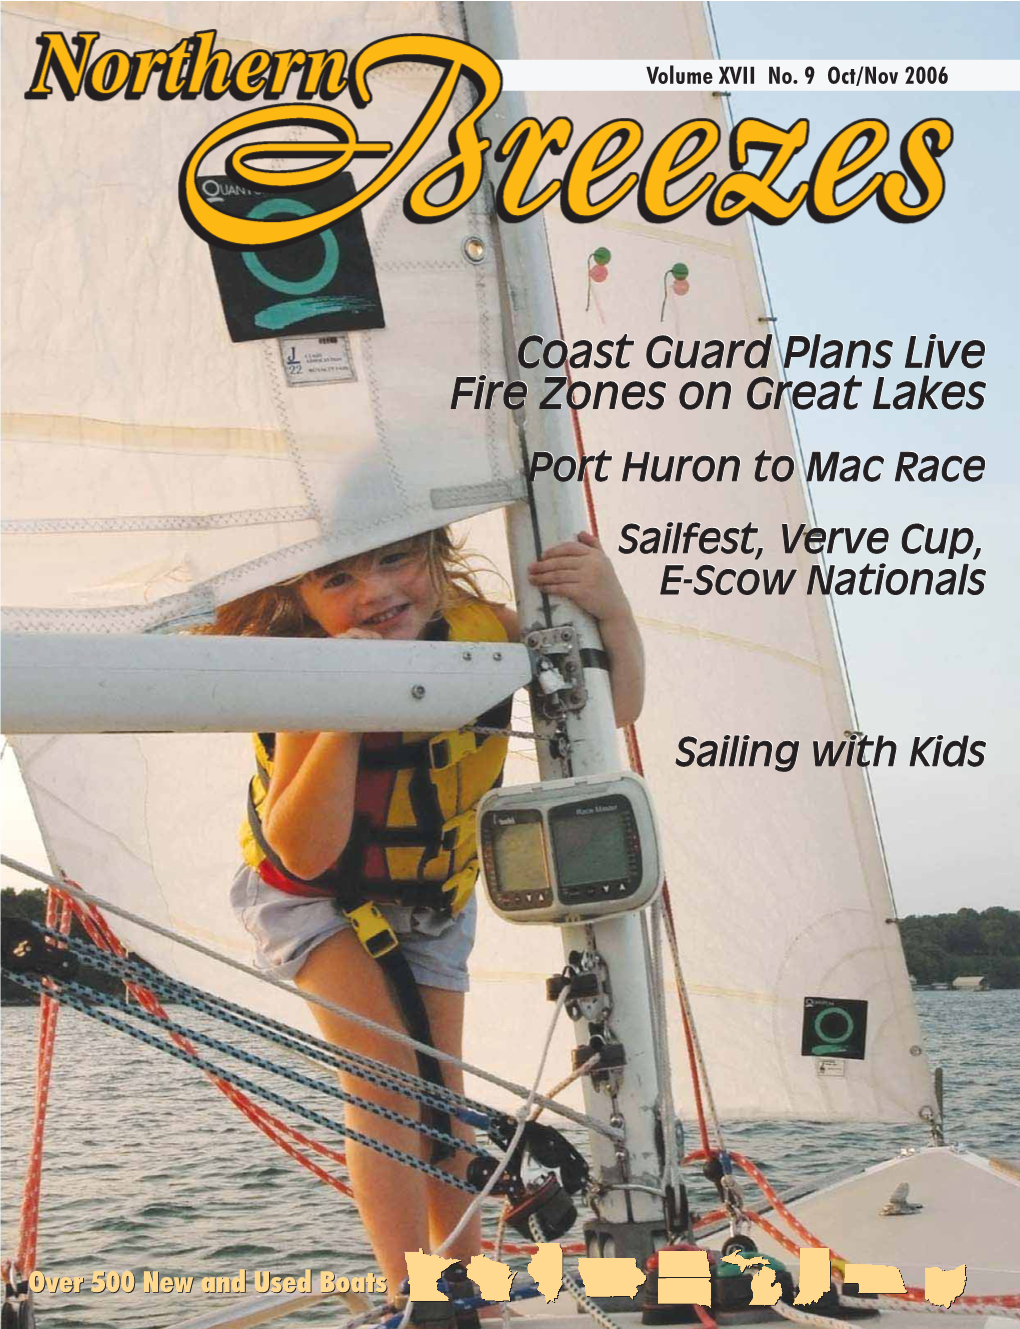 Coast Guard Plans Live Fire Zones on Great Lakes Port Huron to Mac Race Sailfest, Verve Cup, E-Sscow Nationals